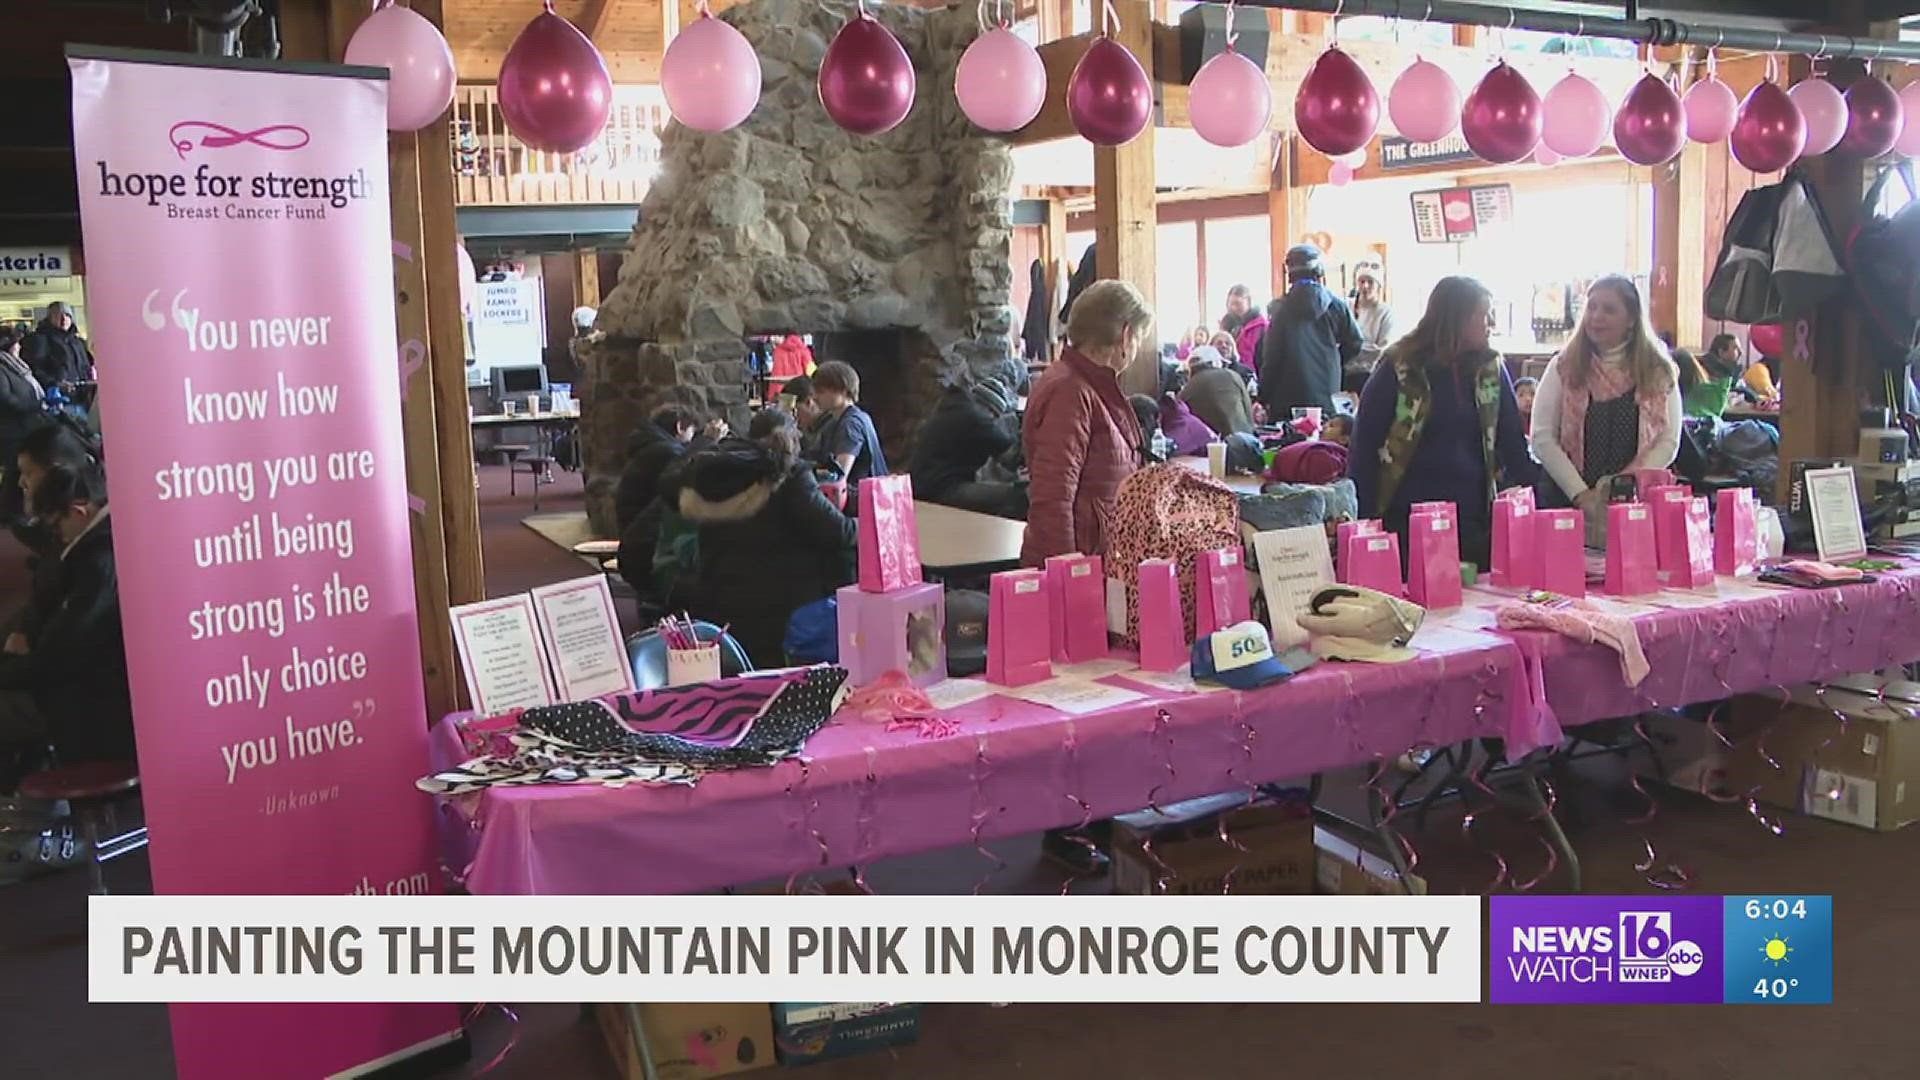 The event Saturday aims to minimize the financial and emotional impact of breast cancer diagnosis and treatment.